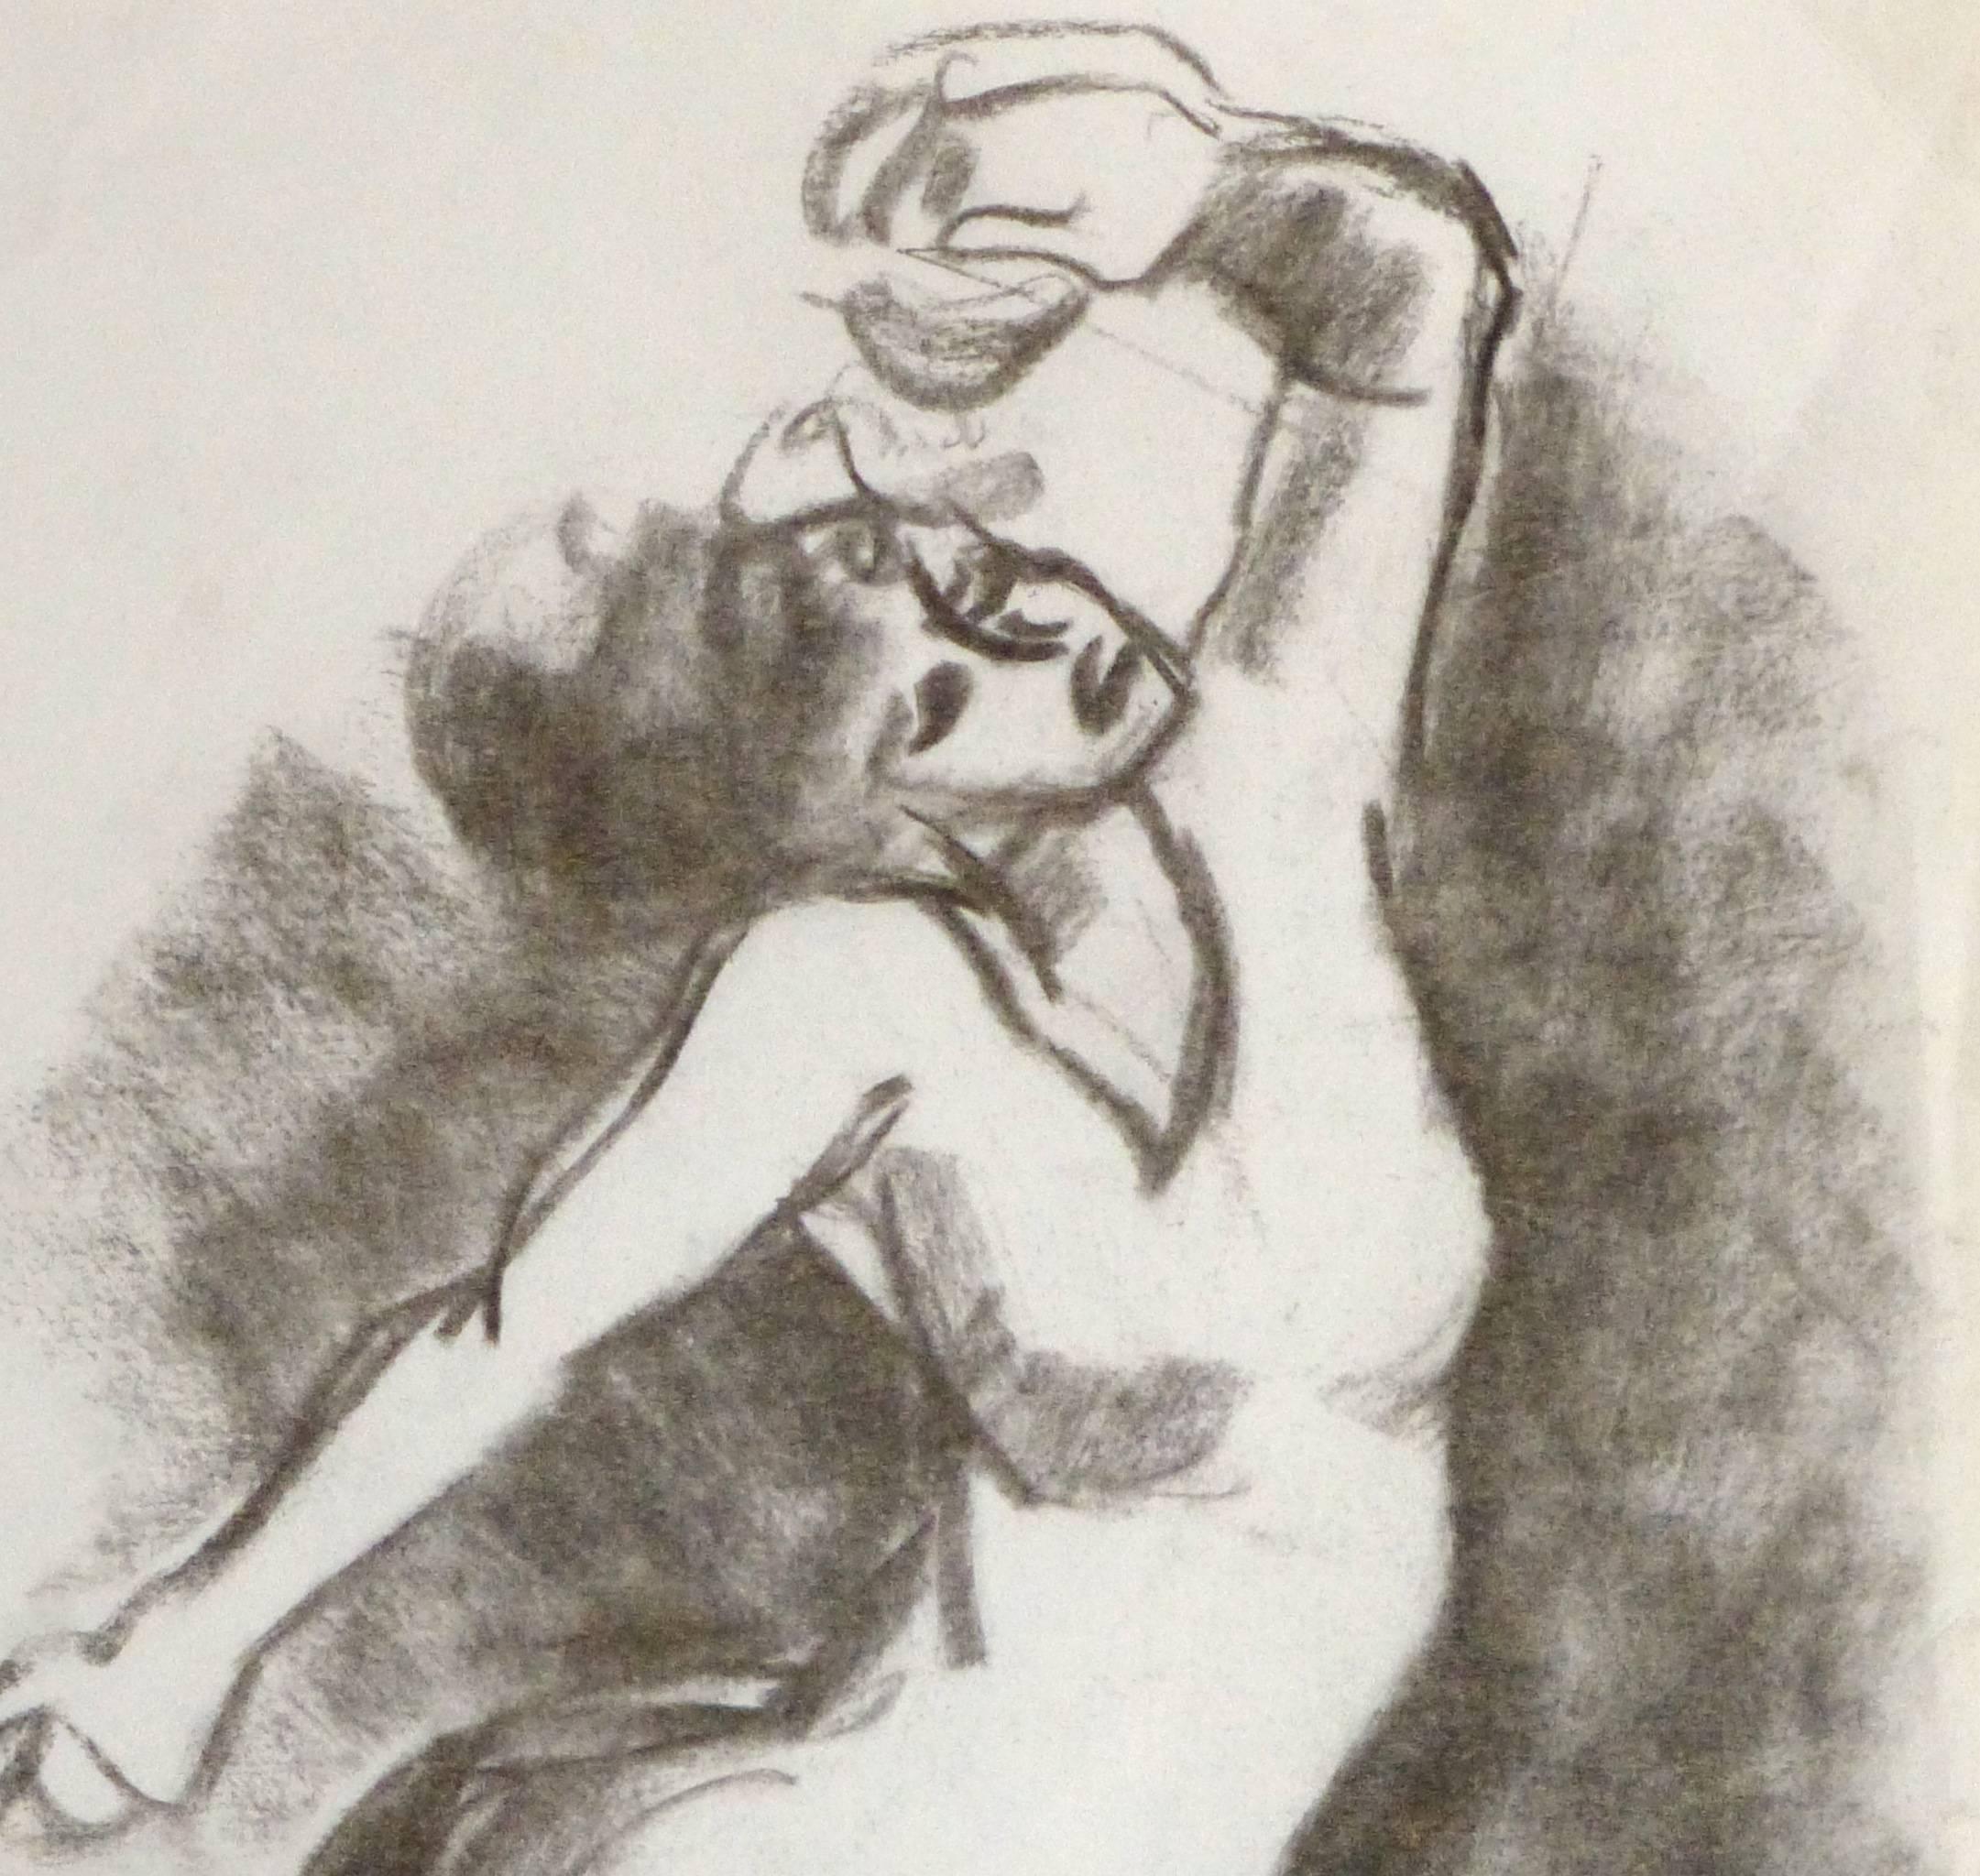 Charcoal Drawing - The Dancer - Art by Unknown